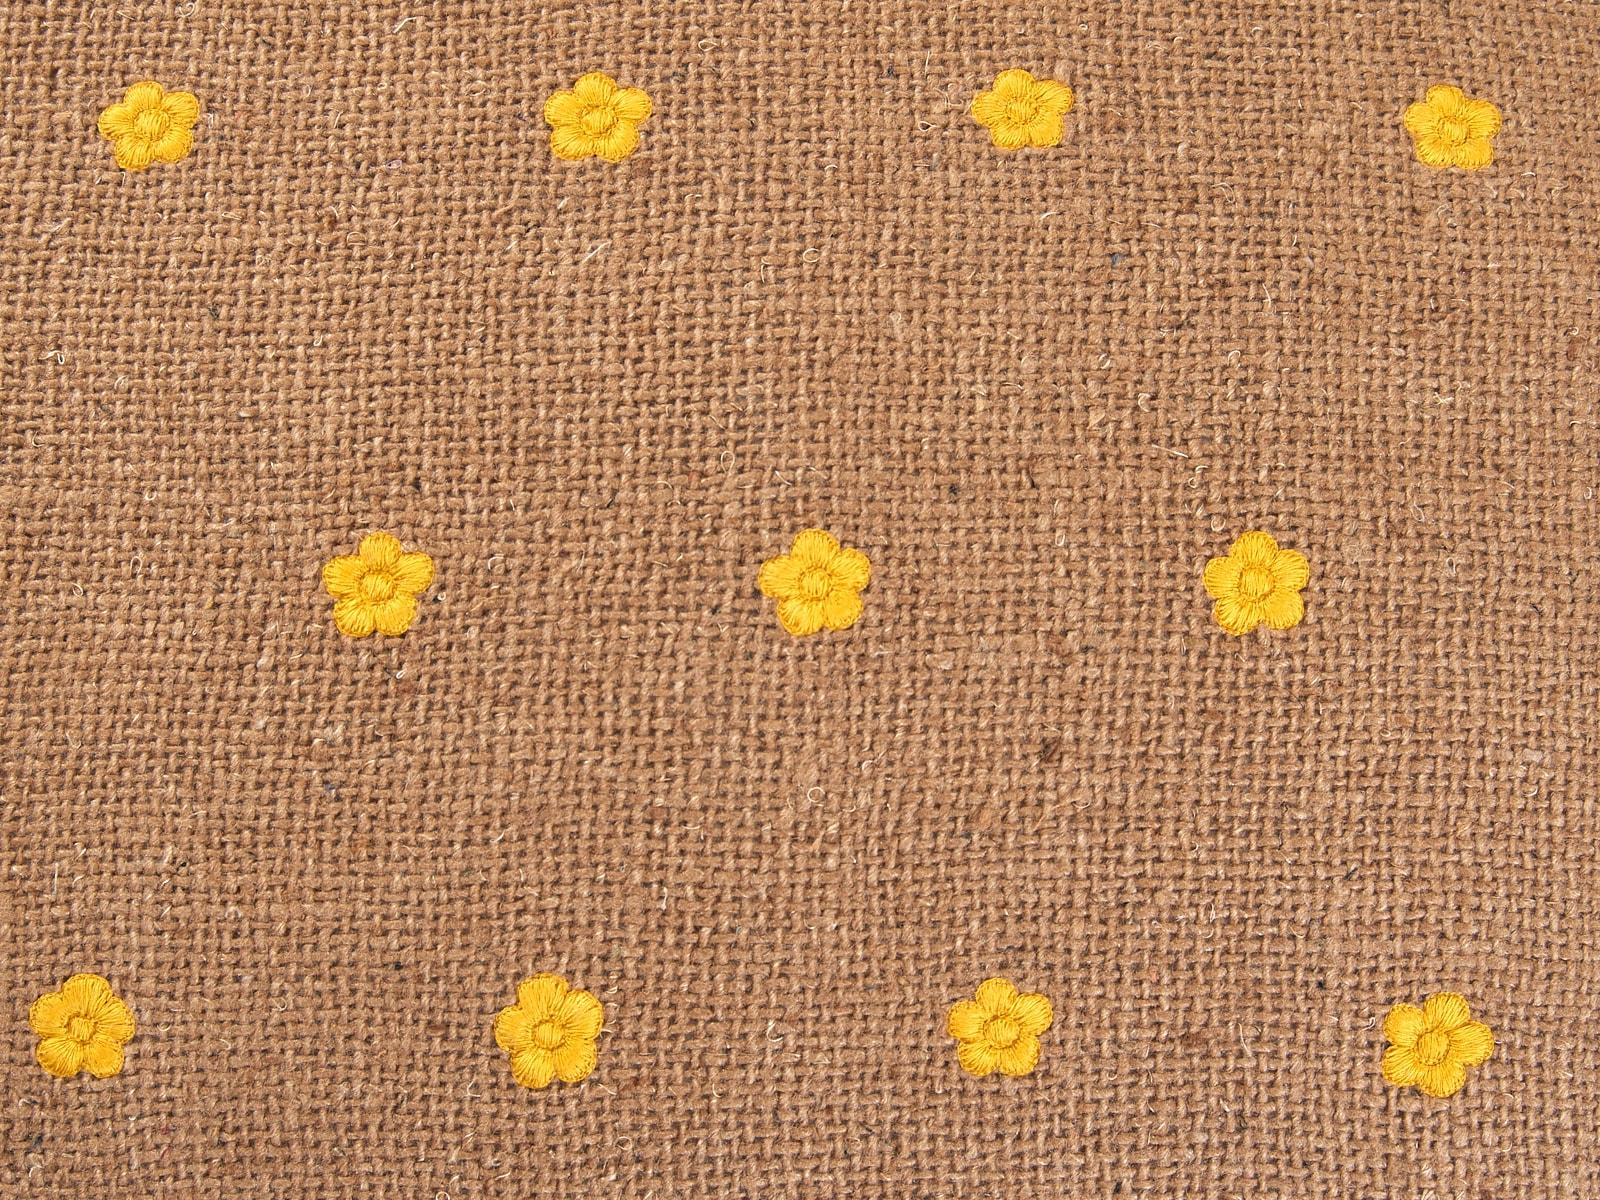 Pick your favourite colour! The sweet little yellow flowers are entirely embroidered by hand on high quality natural linen jute. 
Standard size 60 x 45 cm. Customisable in other sizes, colour combinations or fabrics on request. To visualise the